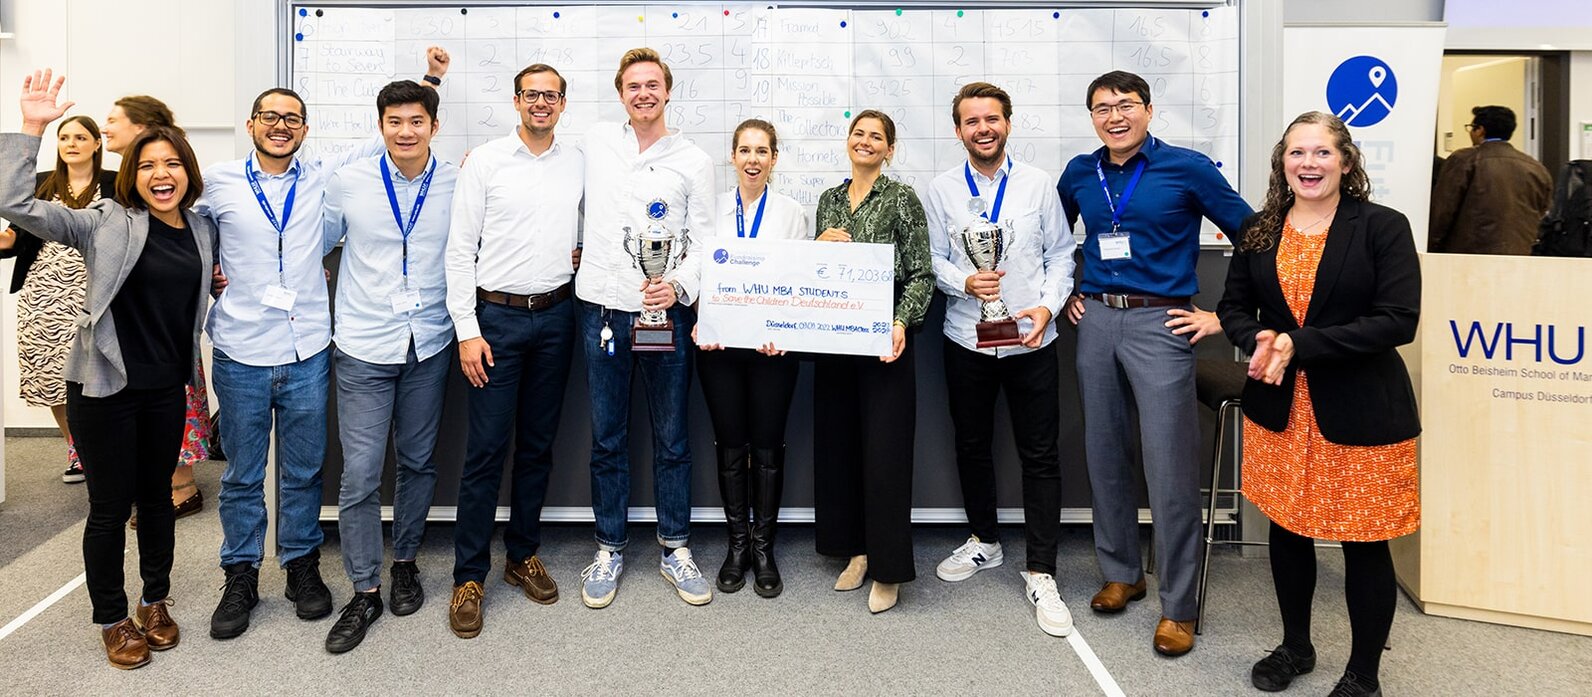 A group of MBA students smile into the camera. One man has a large silver trophy while two women next to him are holding a large cheque in the sum of over €71000 for Save The Children